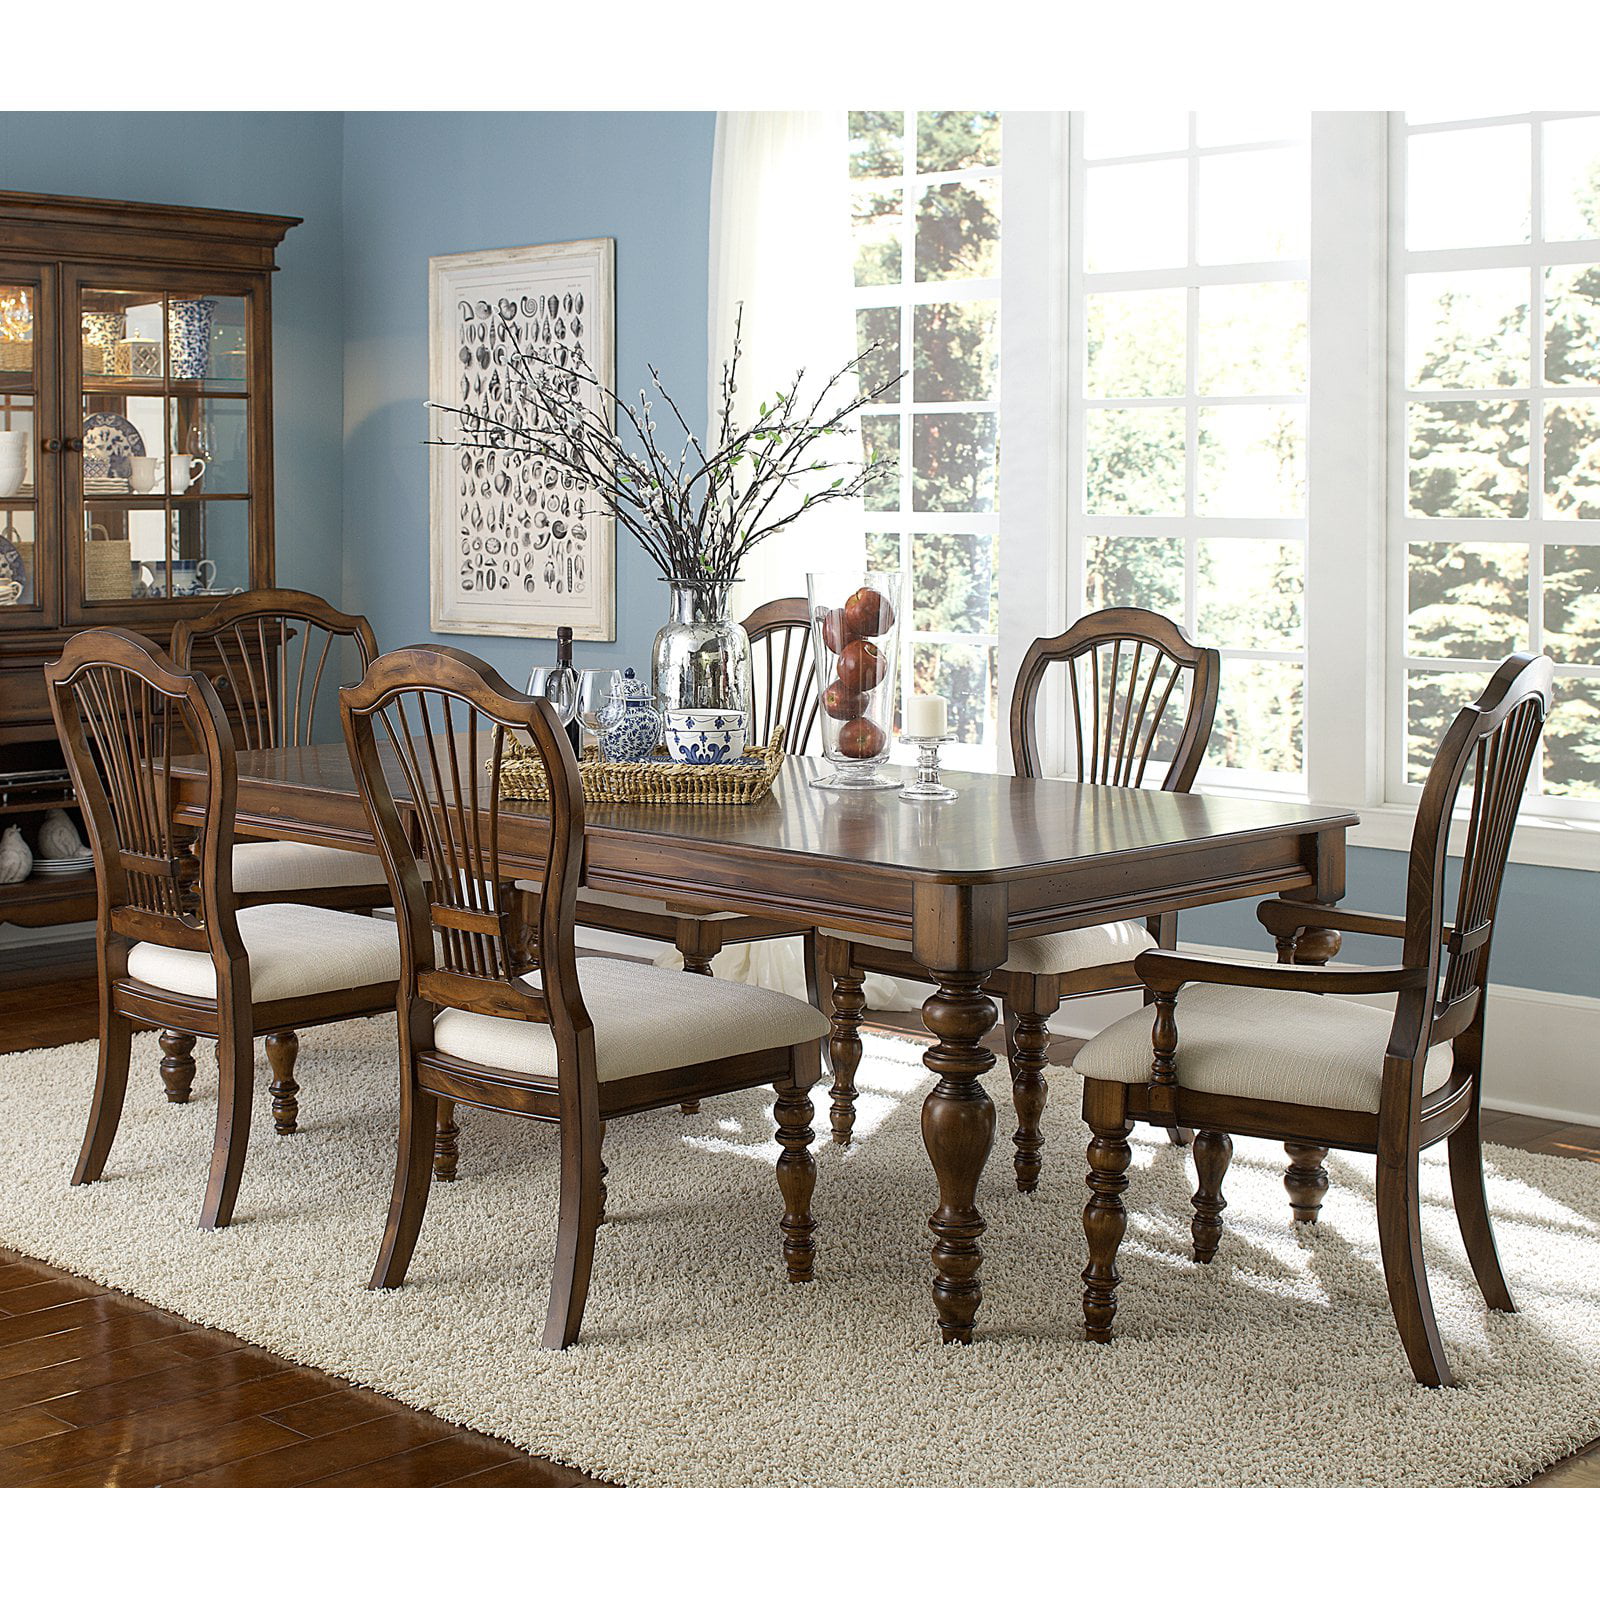 New Pine Dining Room Furniture 